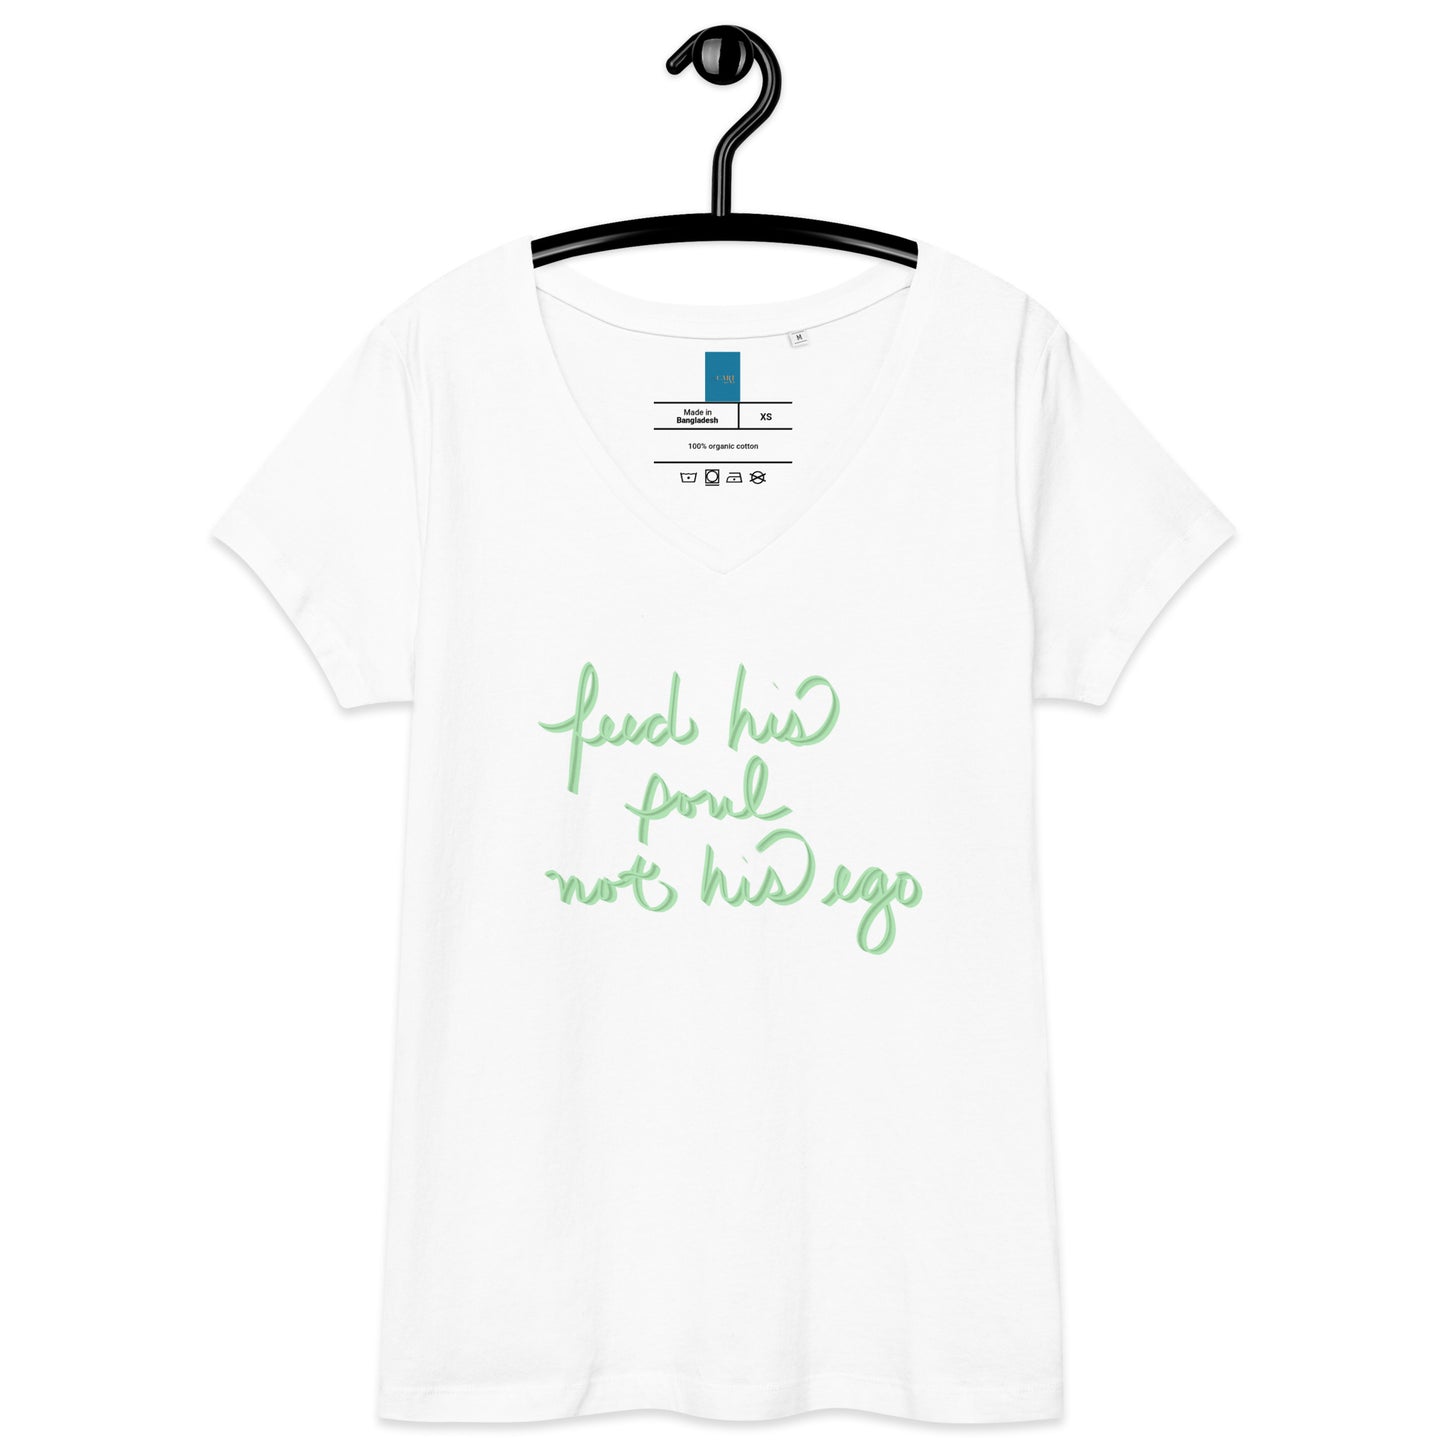 "Feed His Soul" Women’s Fitted V-neck T-shirt